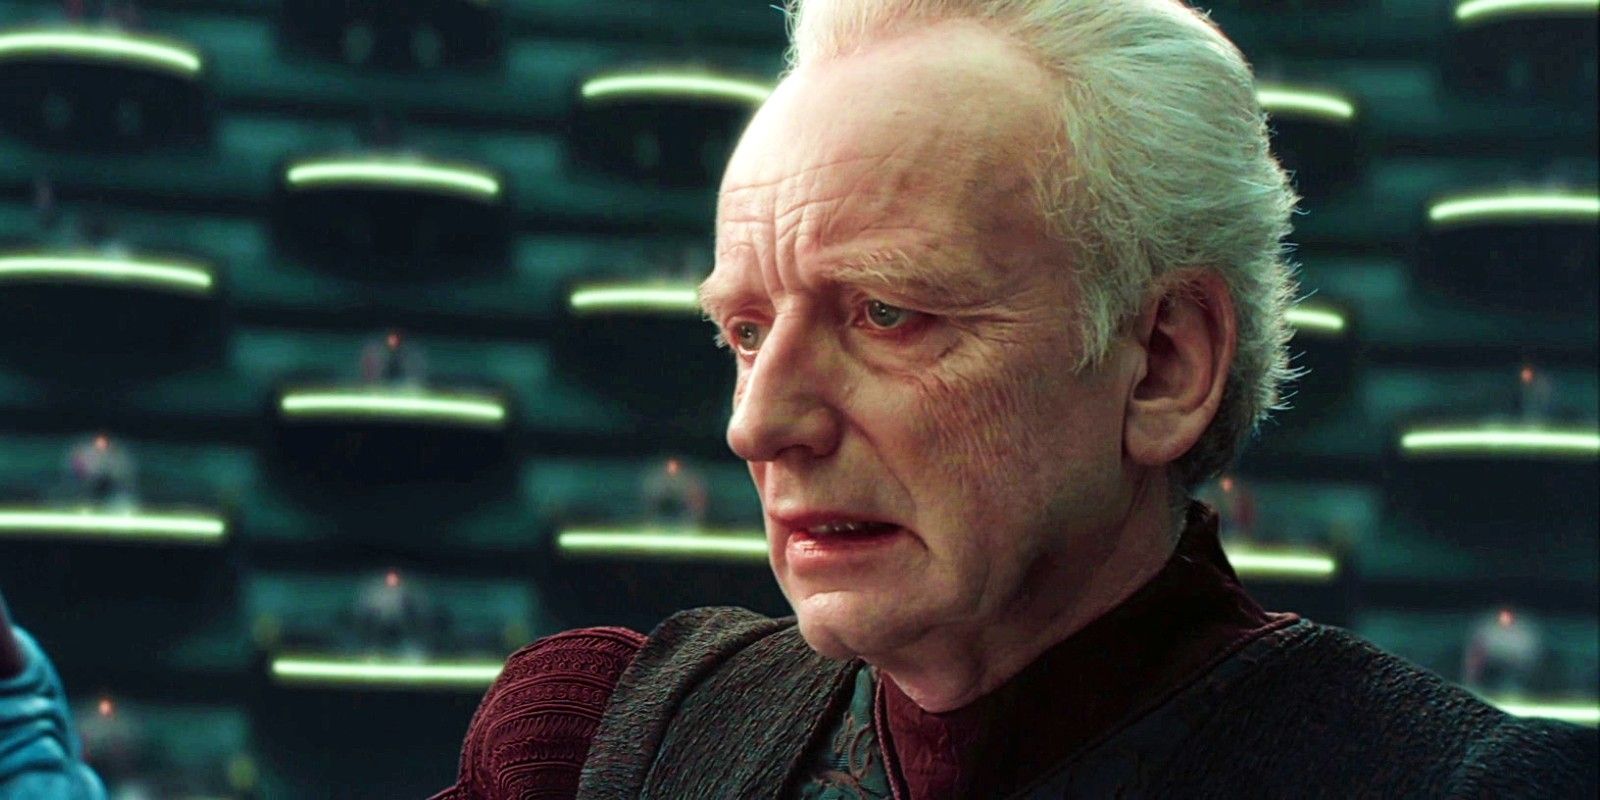 Ian McDiarmid as Palpatine in Attack of the Clones